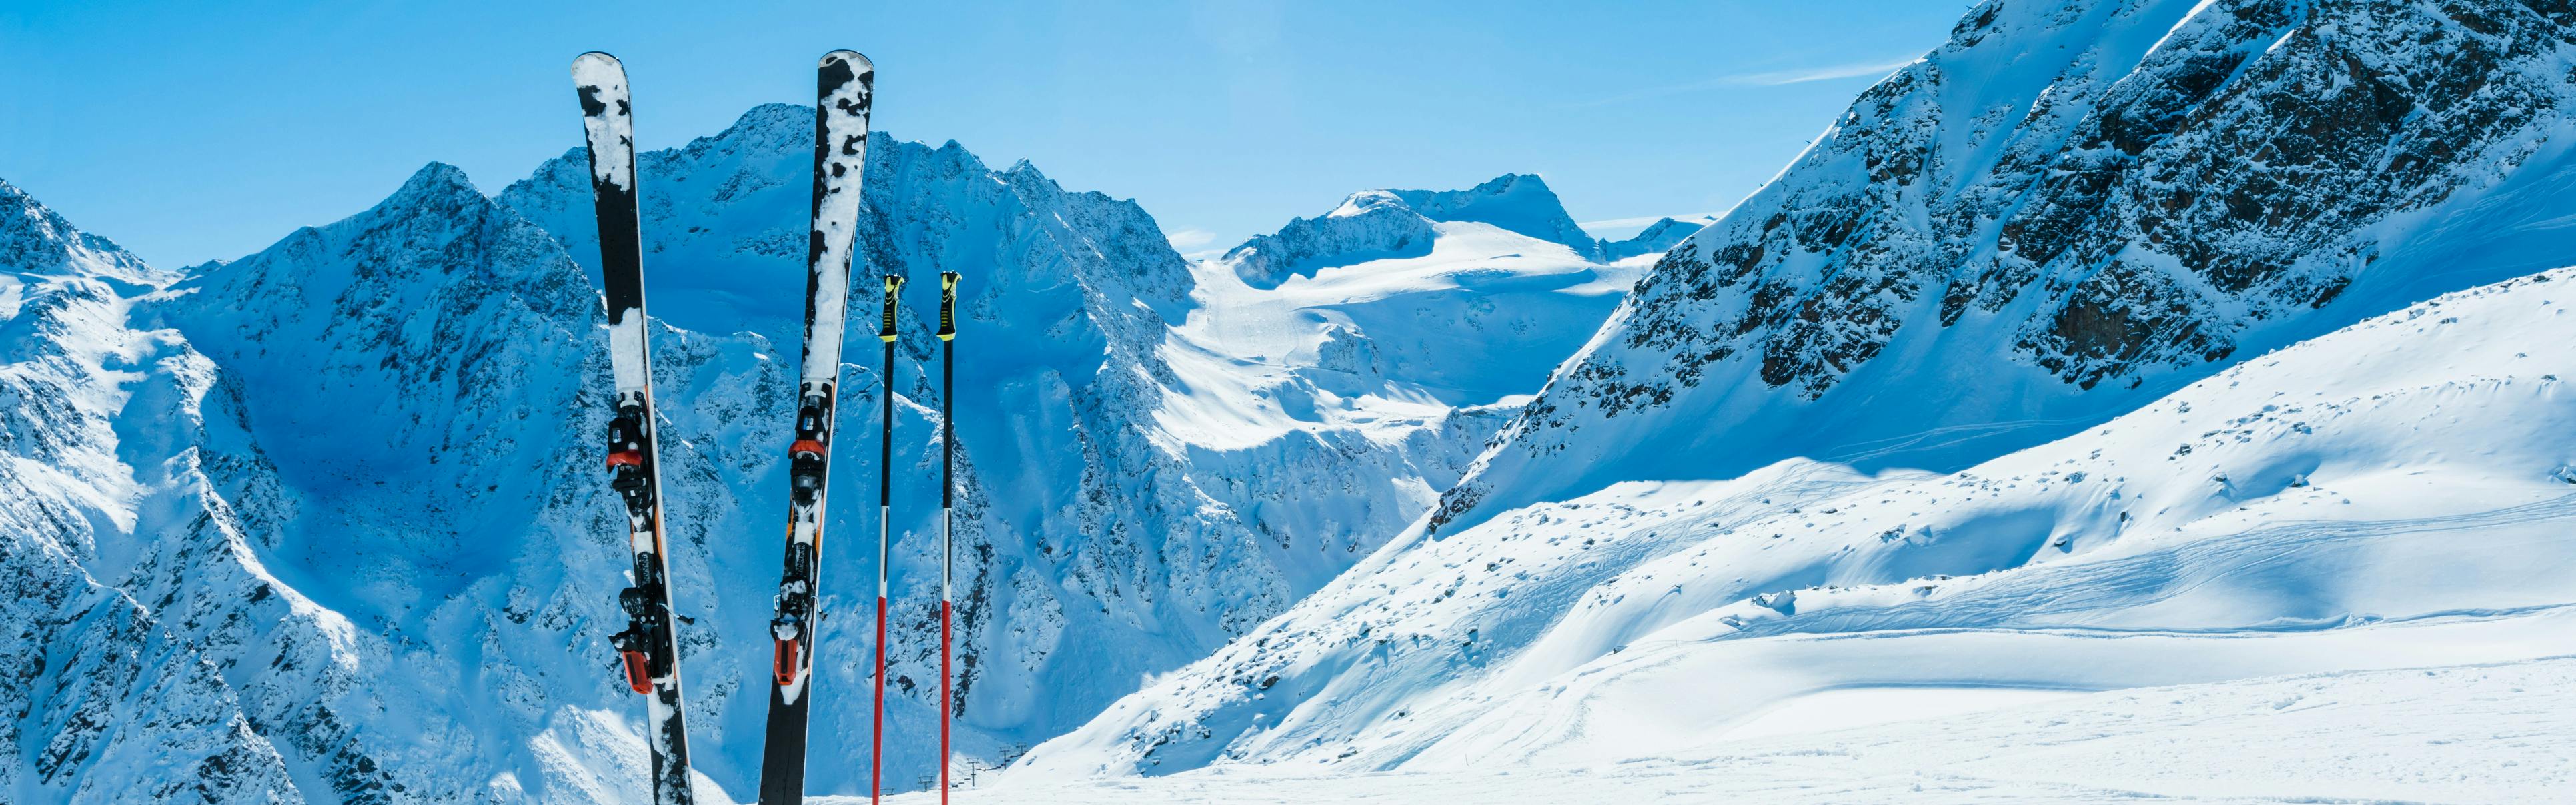 A pair of skis in the snow with mountains in the background